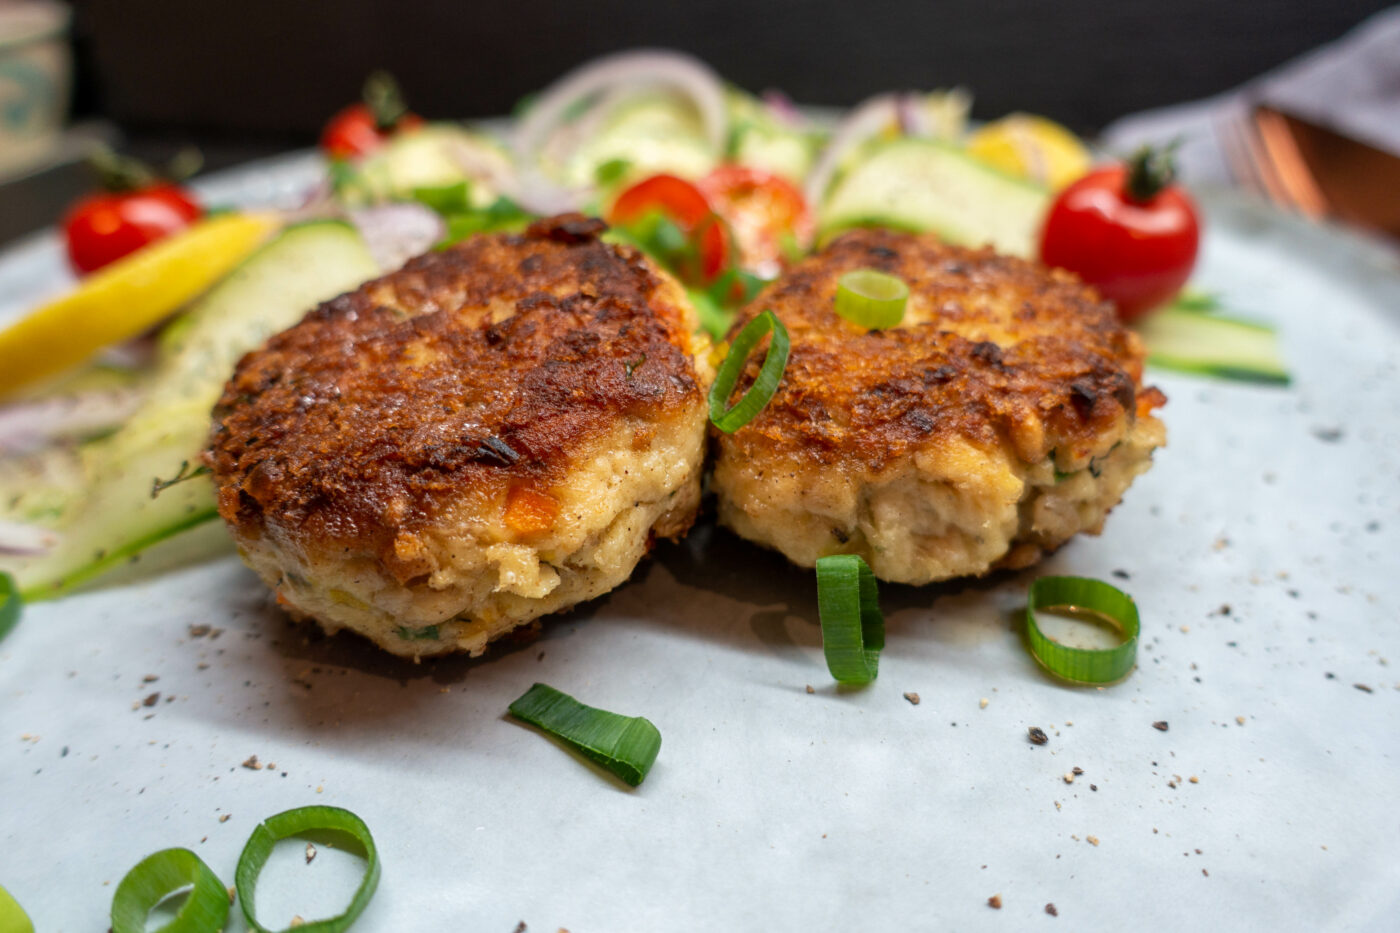 Use of leftovers: Fish cakes made from cooked fish